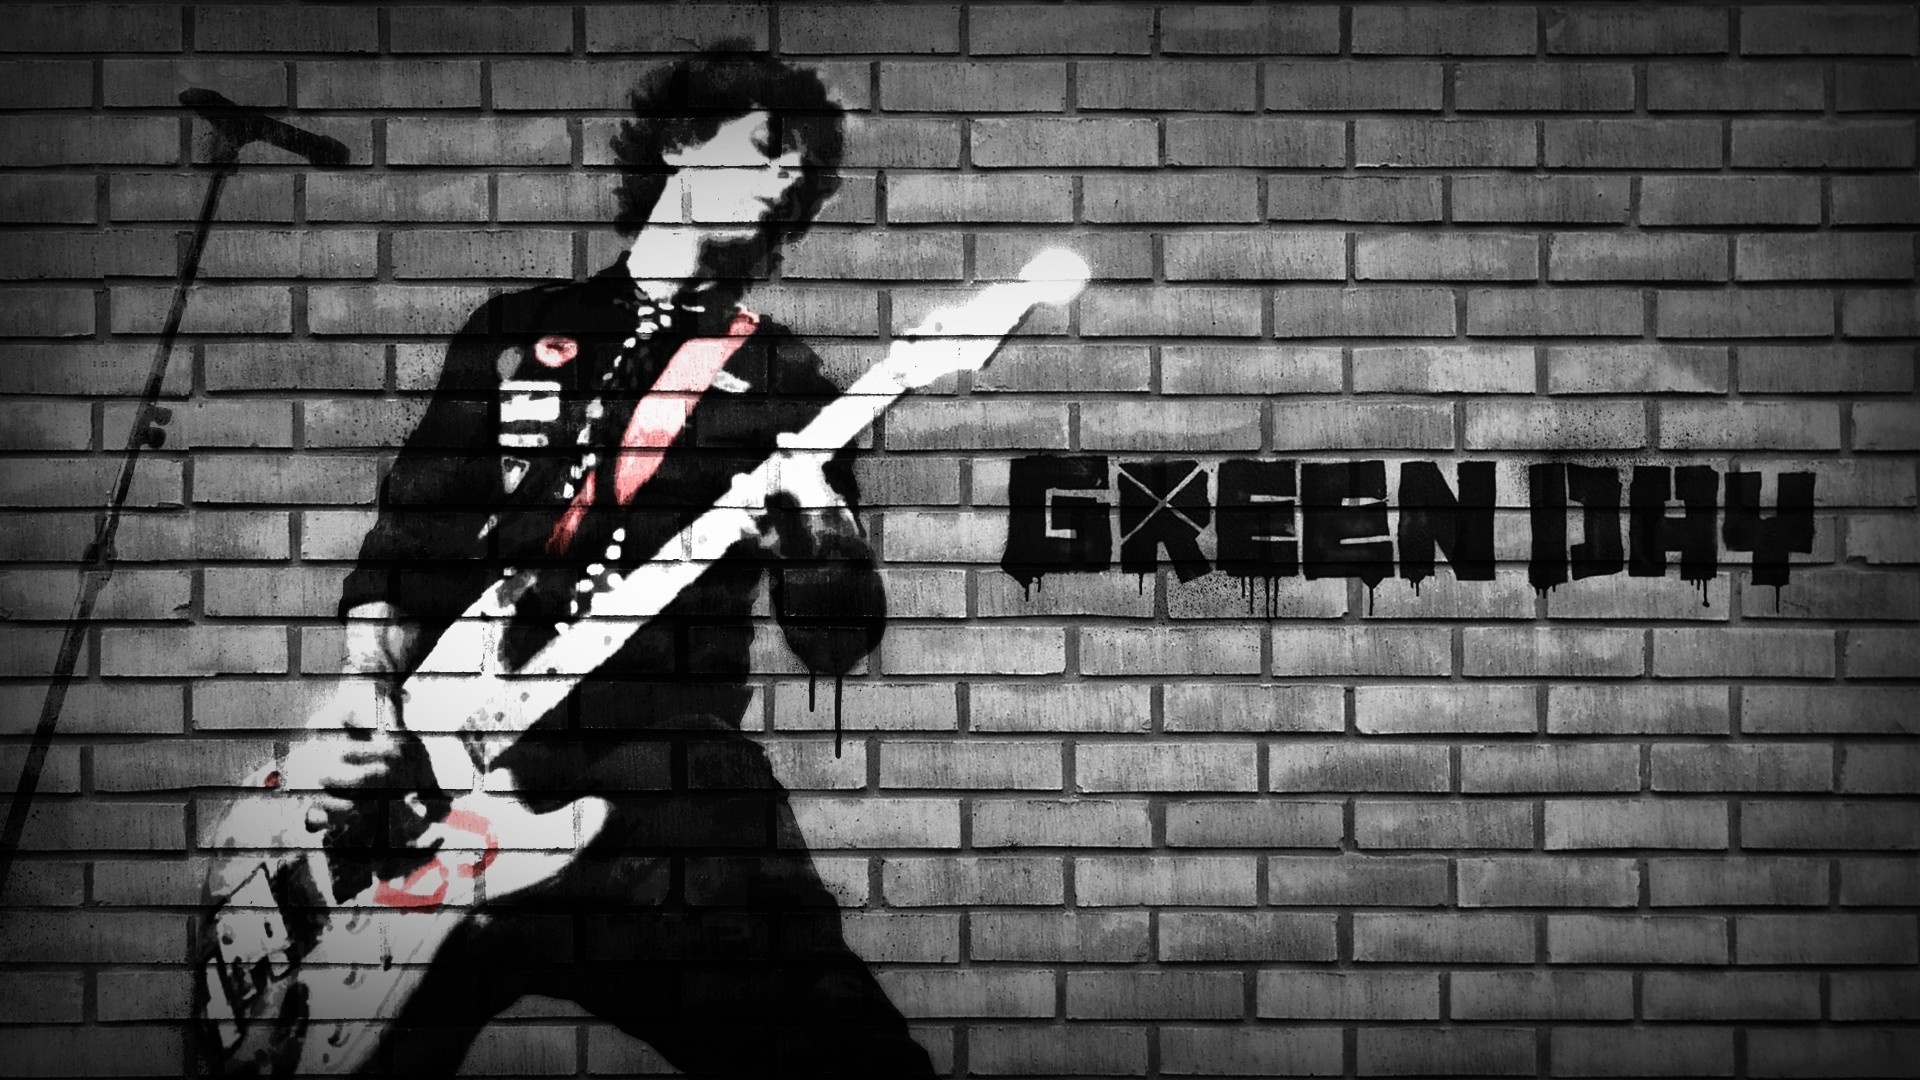 Green Day (Band): The group that has been nominated for 20 Grammy awards and has won five of them. 1920x1080 Full HD Wallpaper.